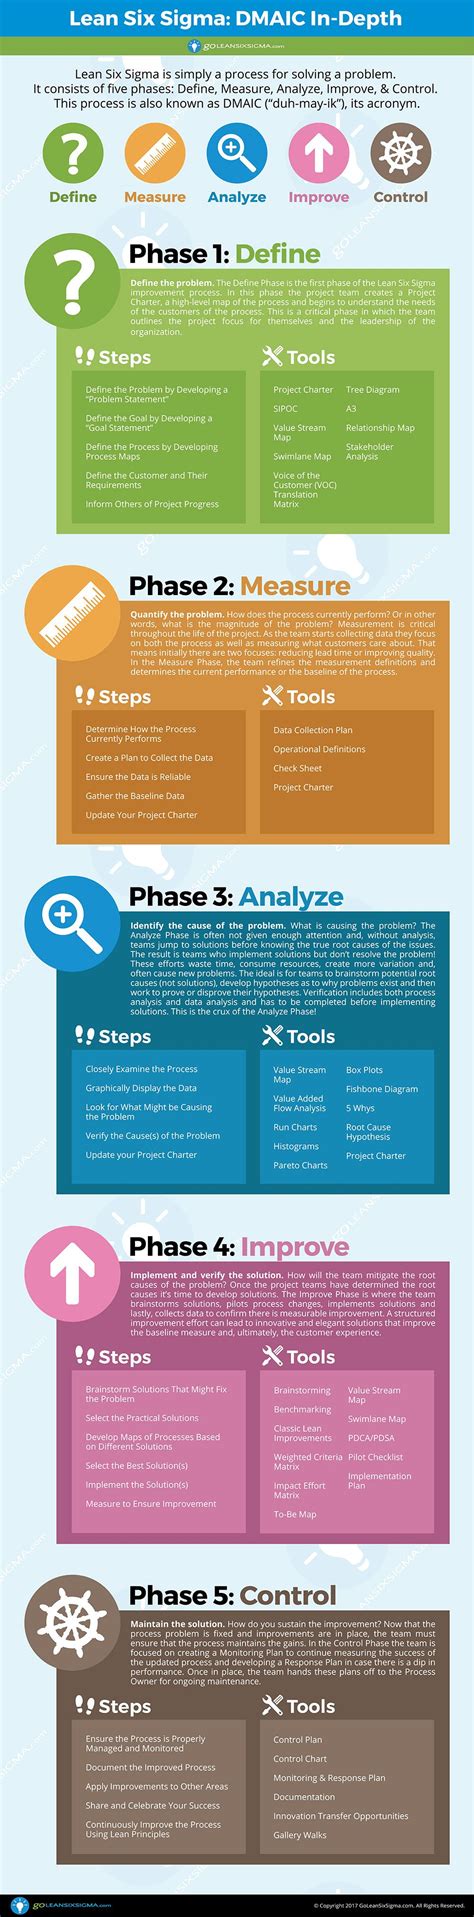 Dmaic The 5 Phases Of Lean Six Sigma Lean Six